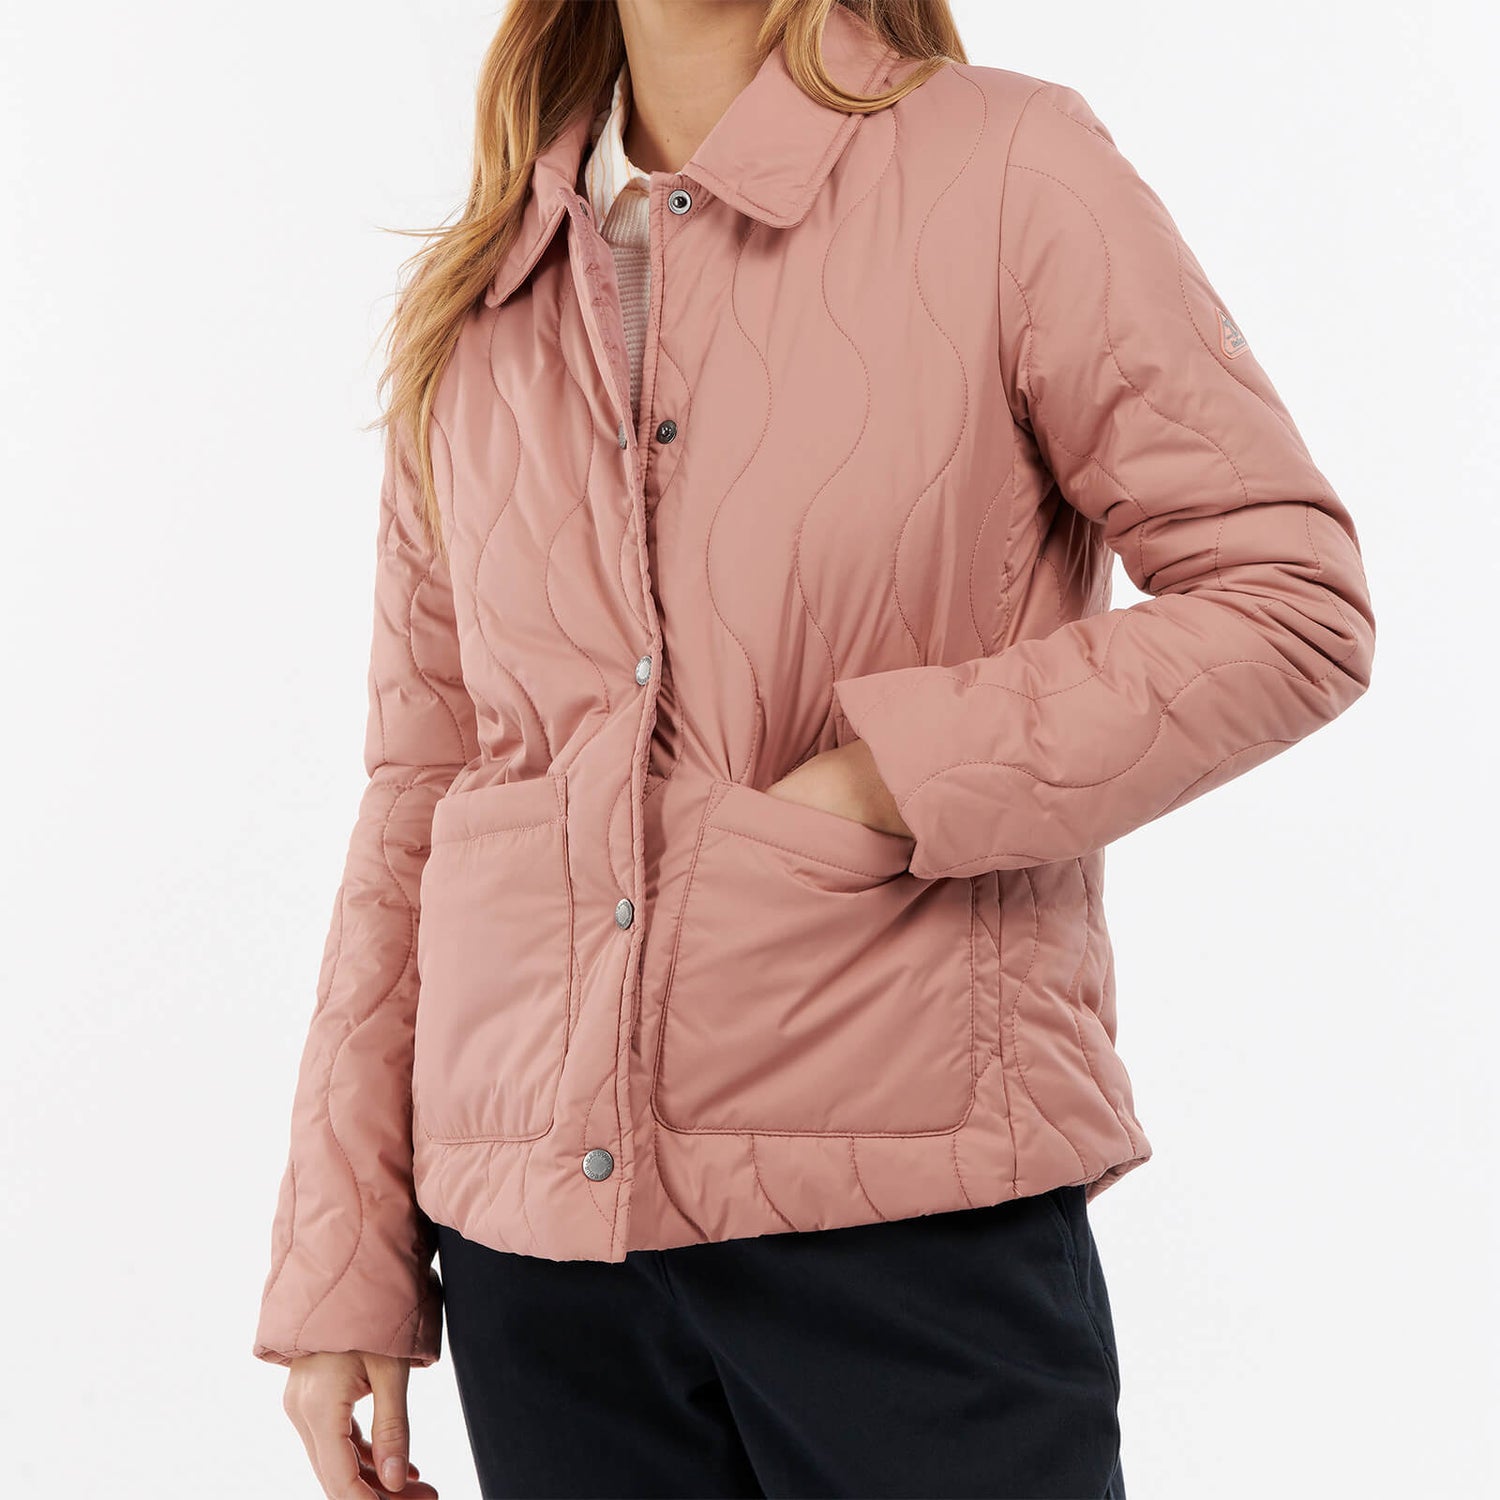 Barbour Women's Barmouth Quilted Jacket - Soft Coral - UK 8